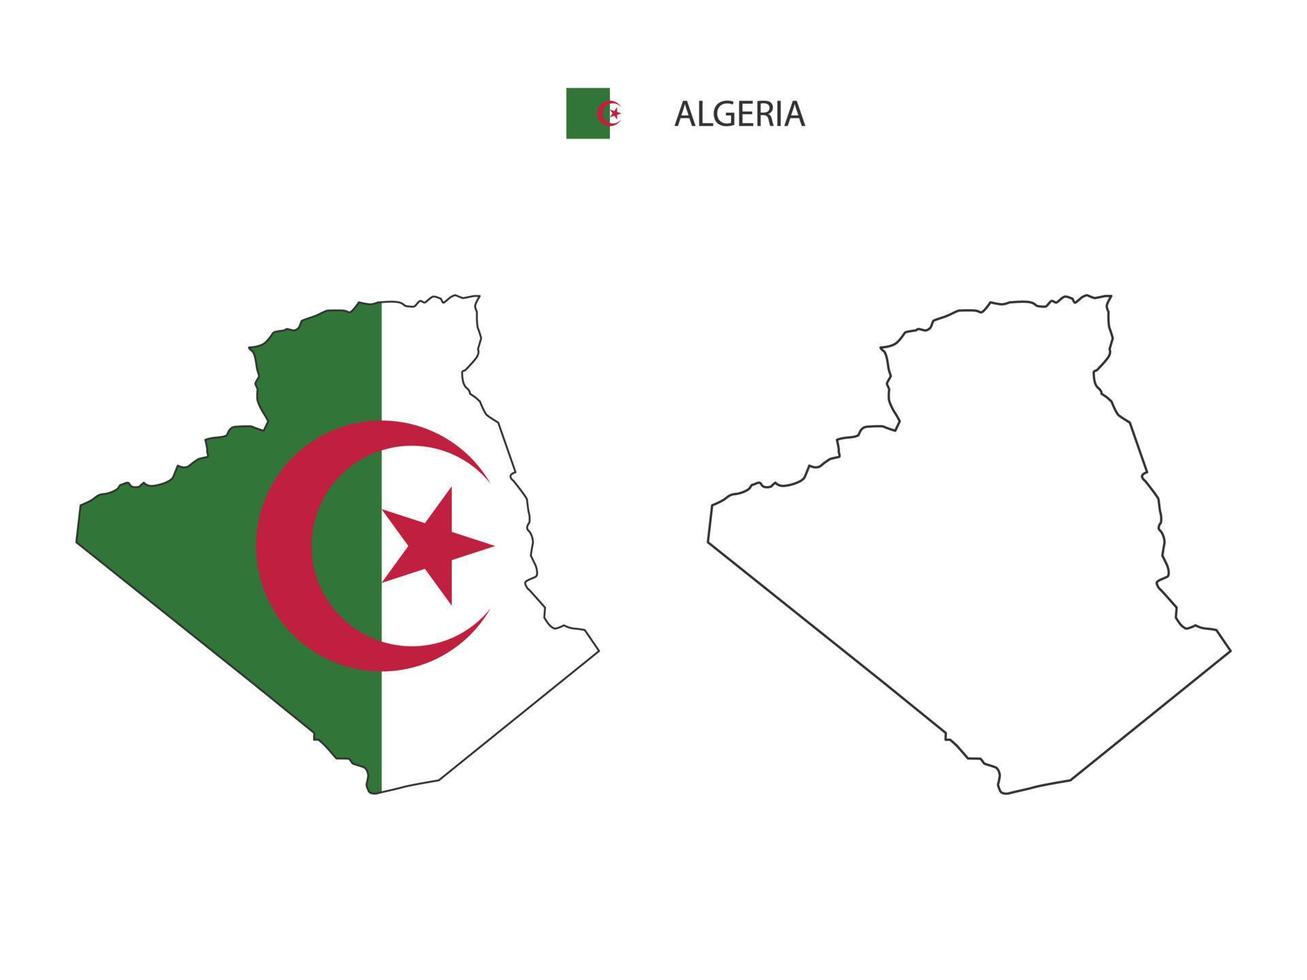 Algeria map city vector divided by outline simplicity style. Have 2 versions, black thin line version and color of country flag version. Both map were on the white background.